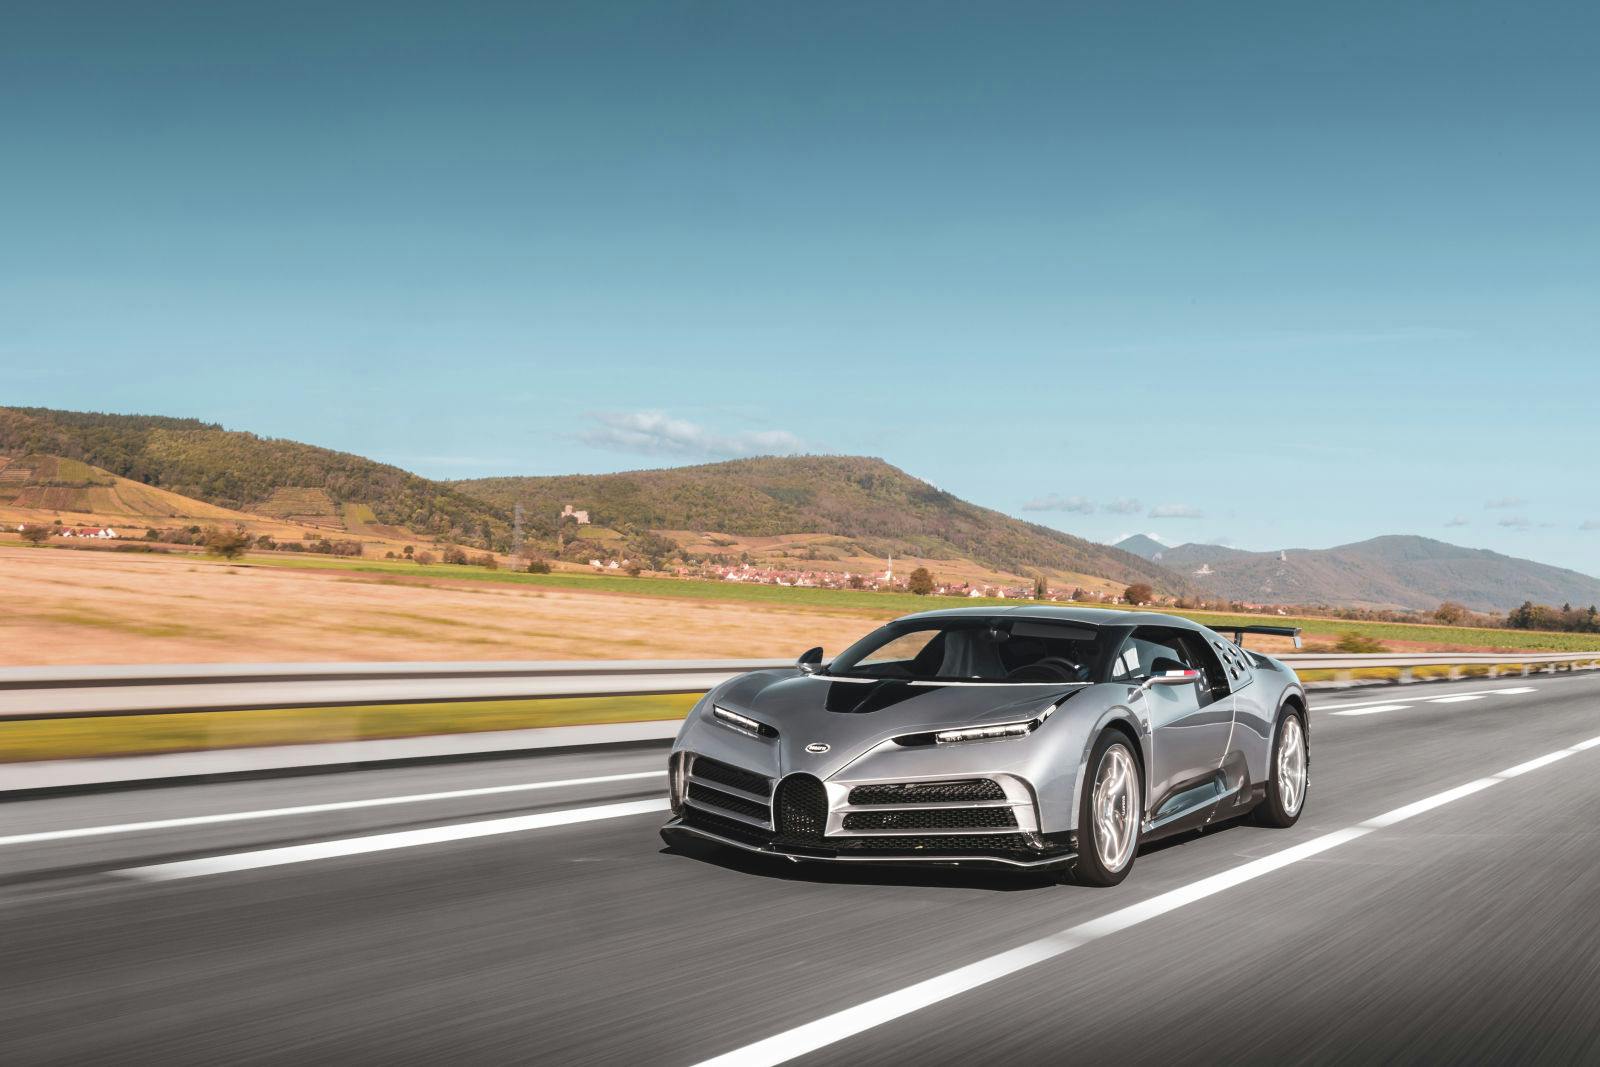 The Centodieci with its elegant 'EB110 Argent' paint finish tested on the highway.